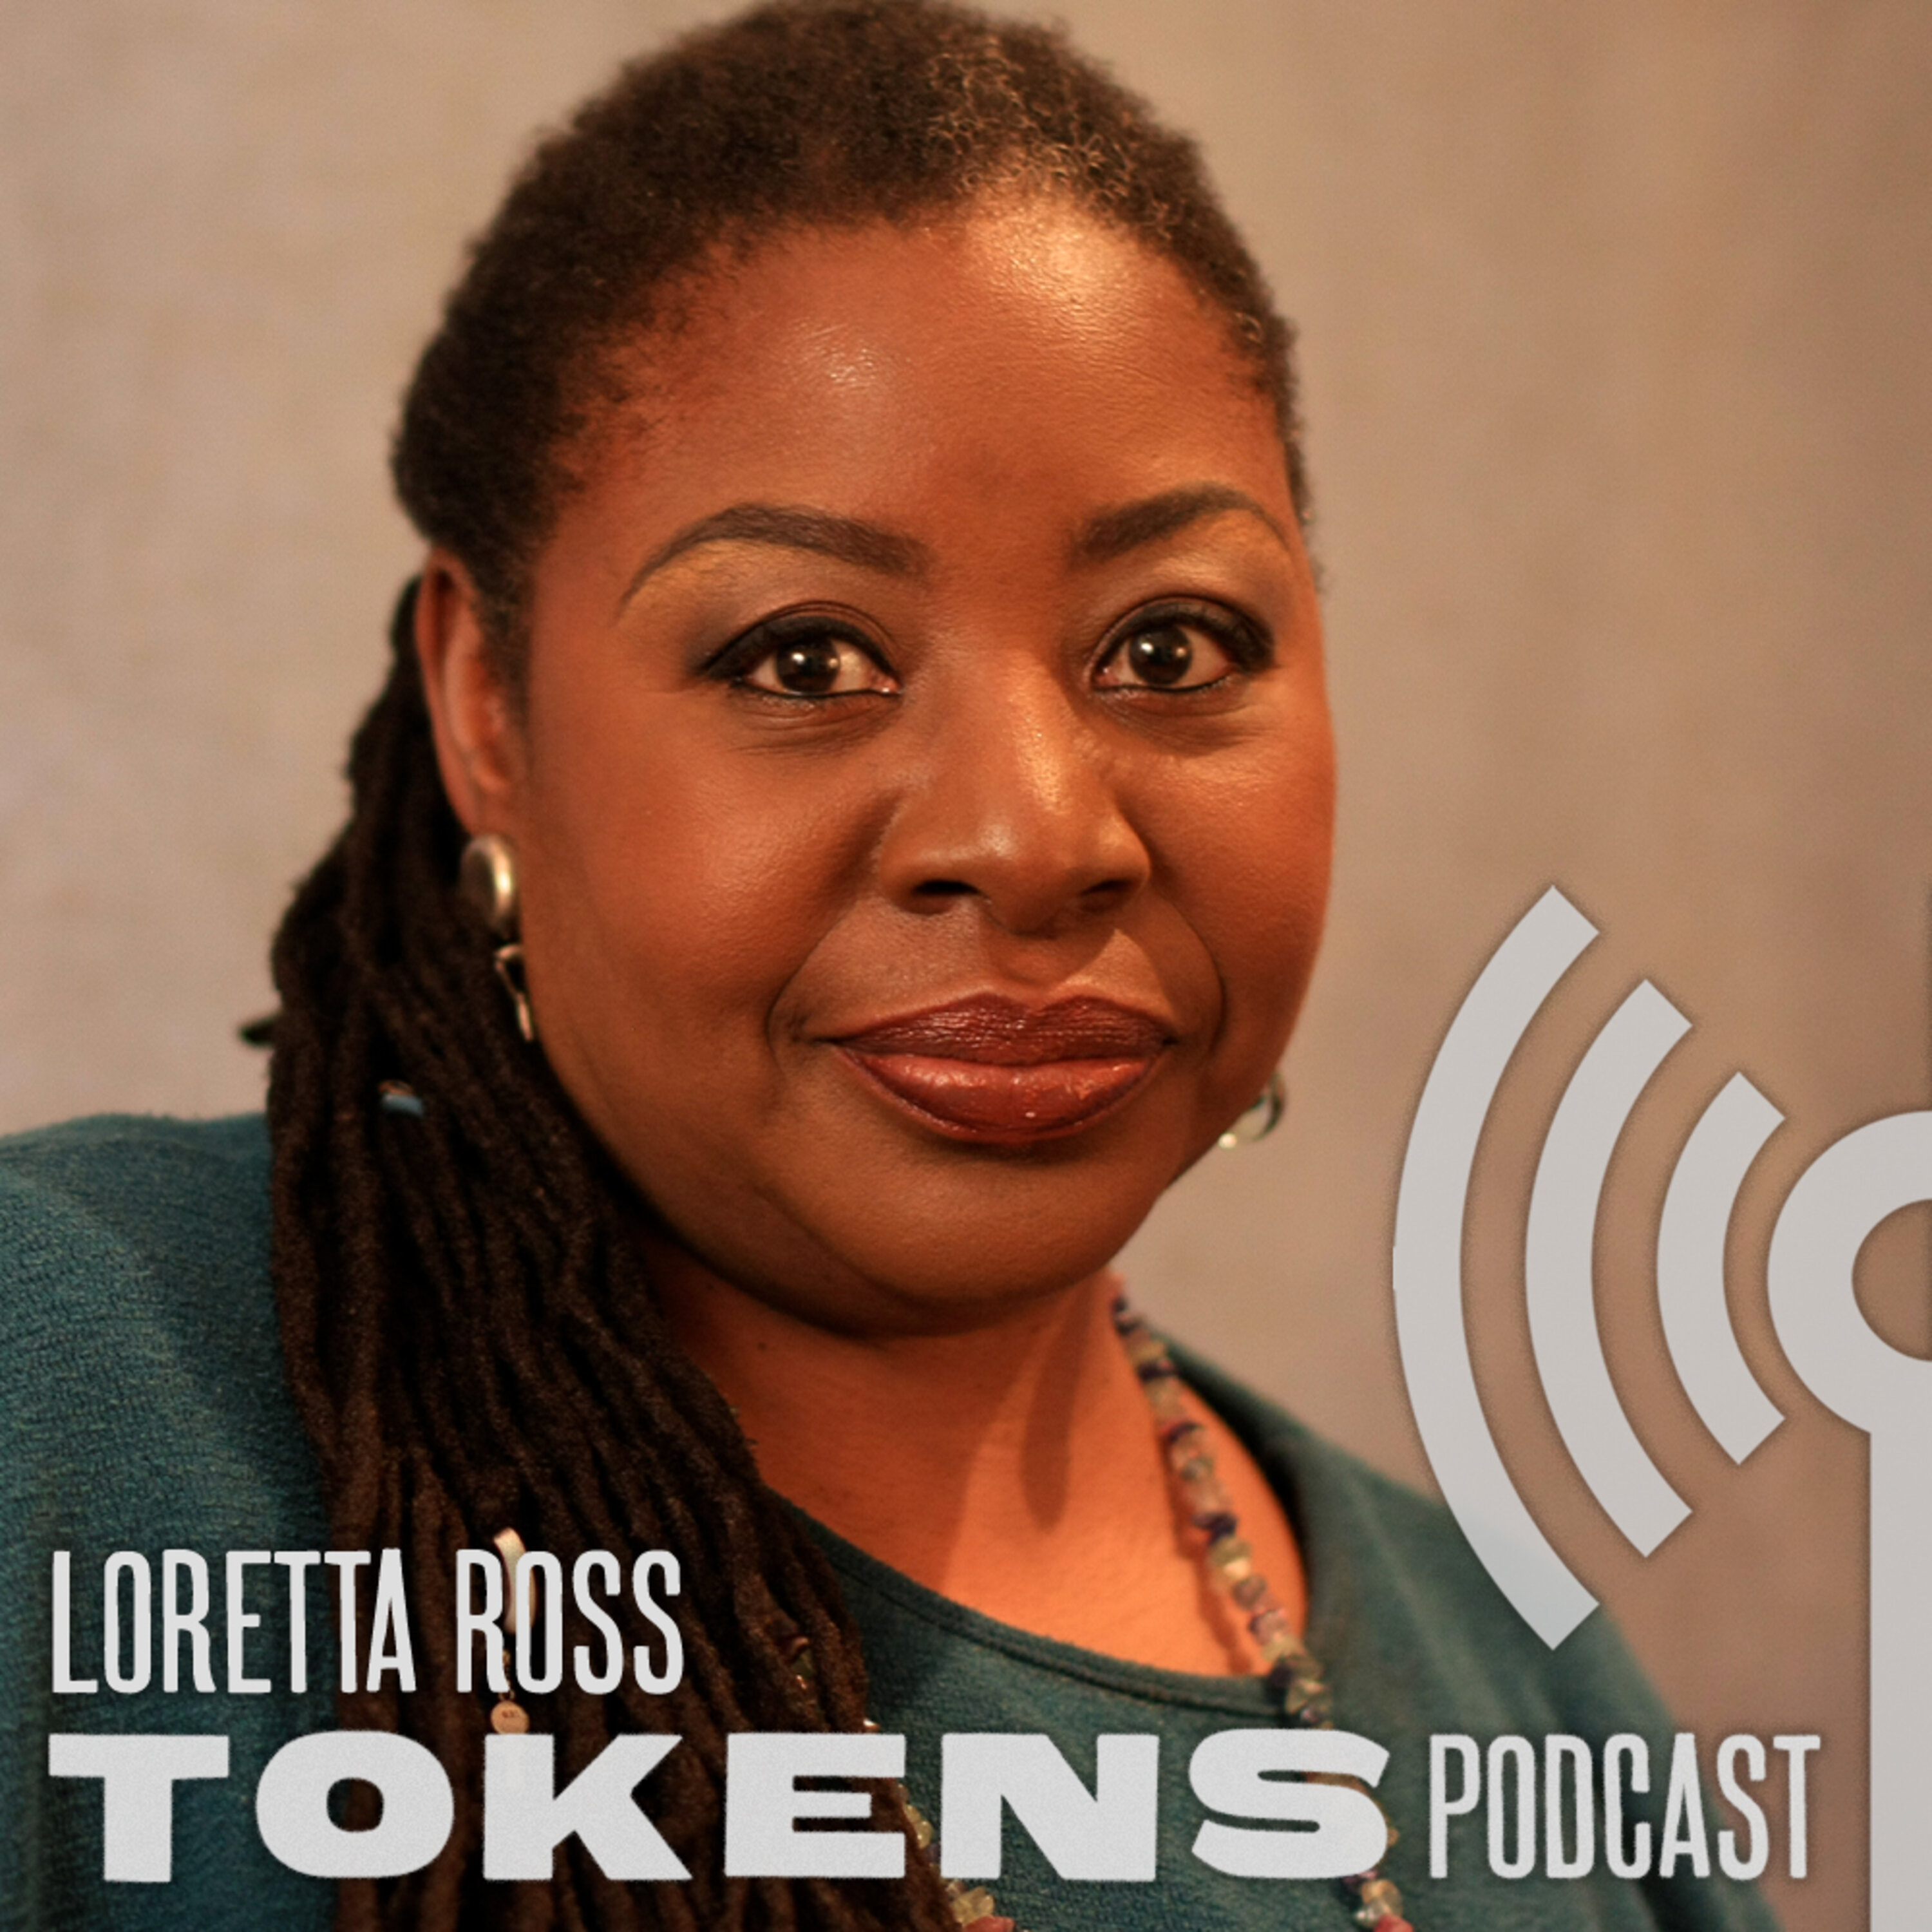 Thumbnail for "19: “I’m a Black Feminist: I Think Call Out Culture is Toxic”: Loretta Ross".